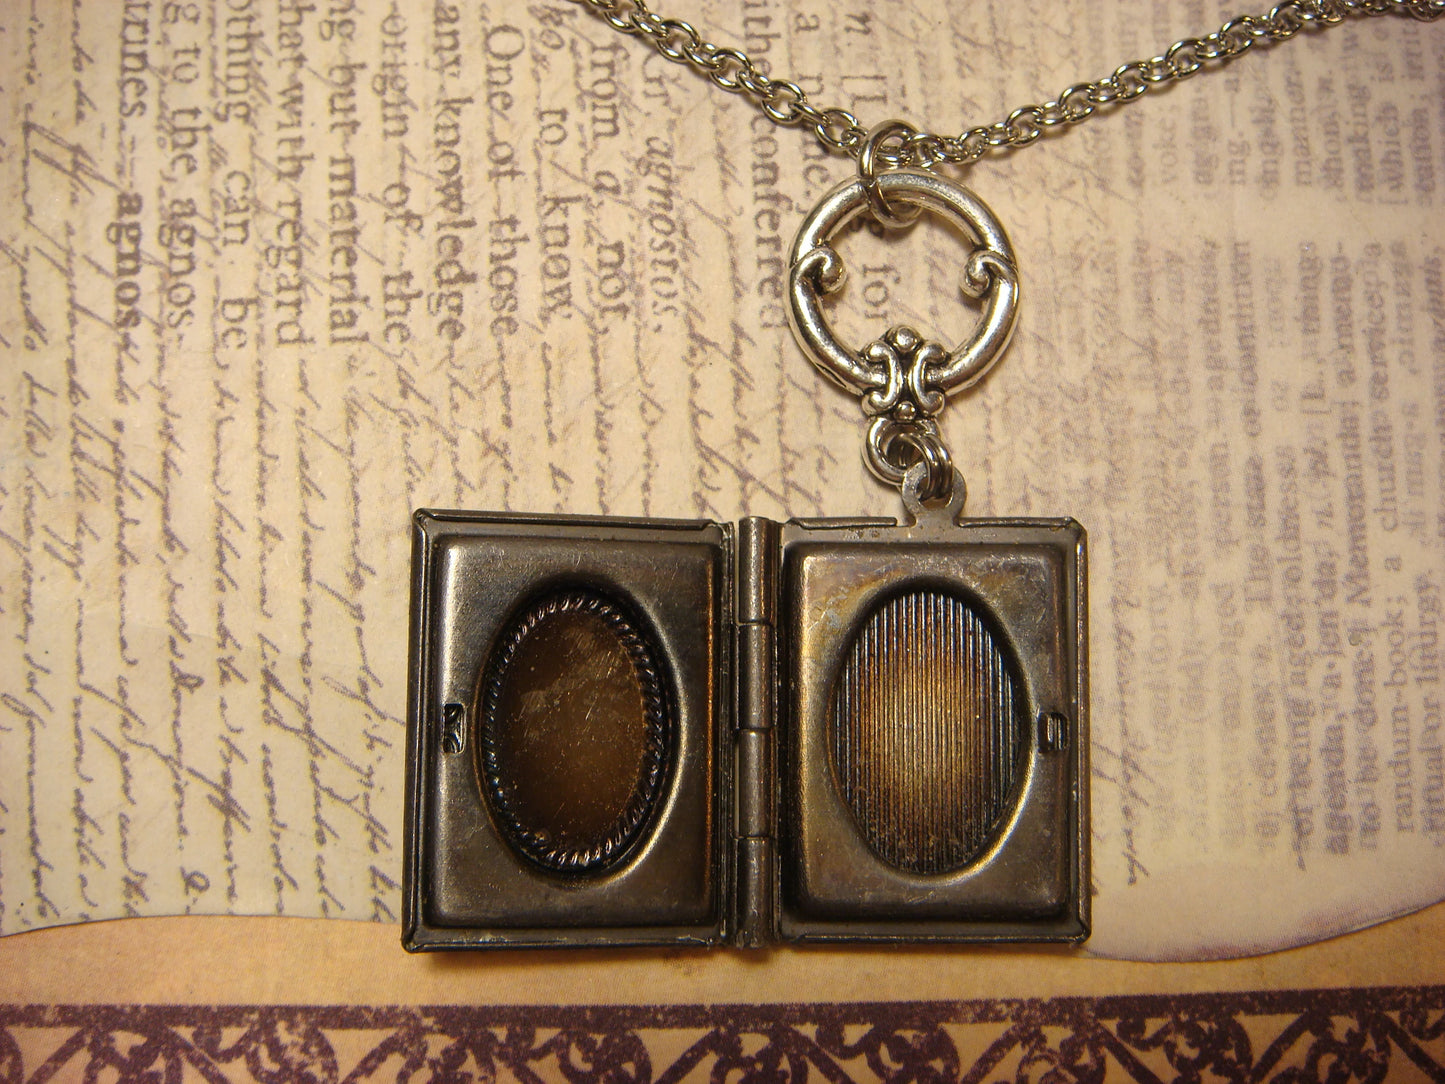 Cat on Moon Book Locket Necklace in Antique Silver